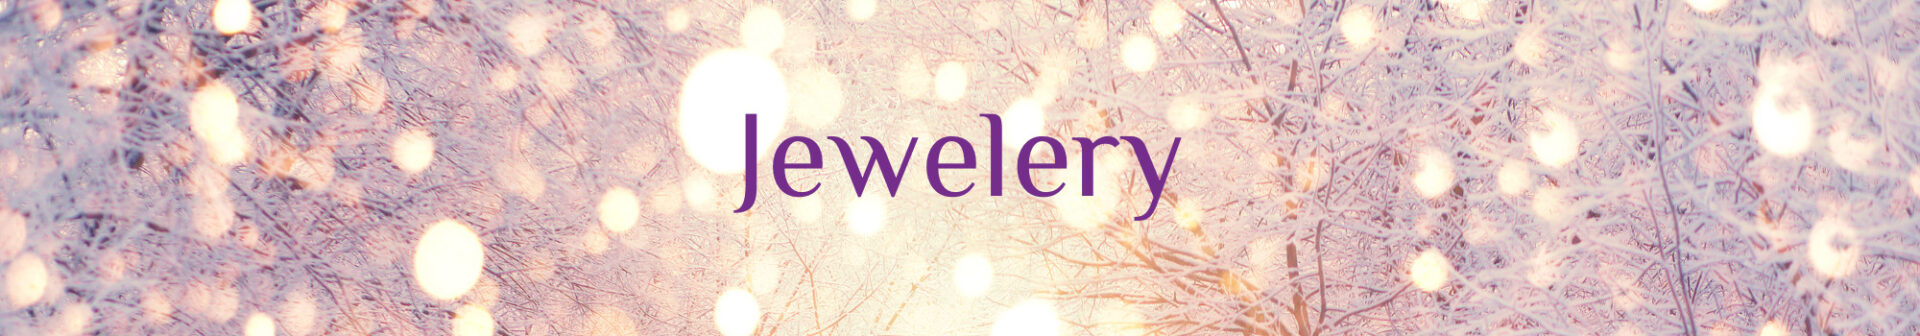 Well-being in winter: Jewelery